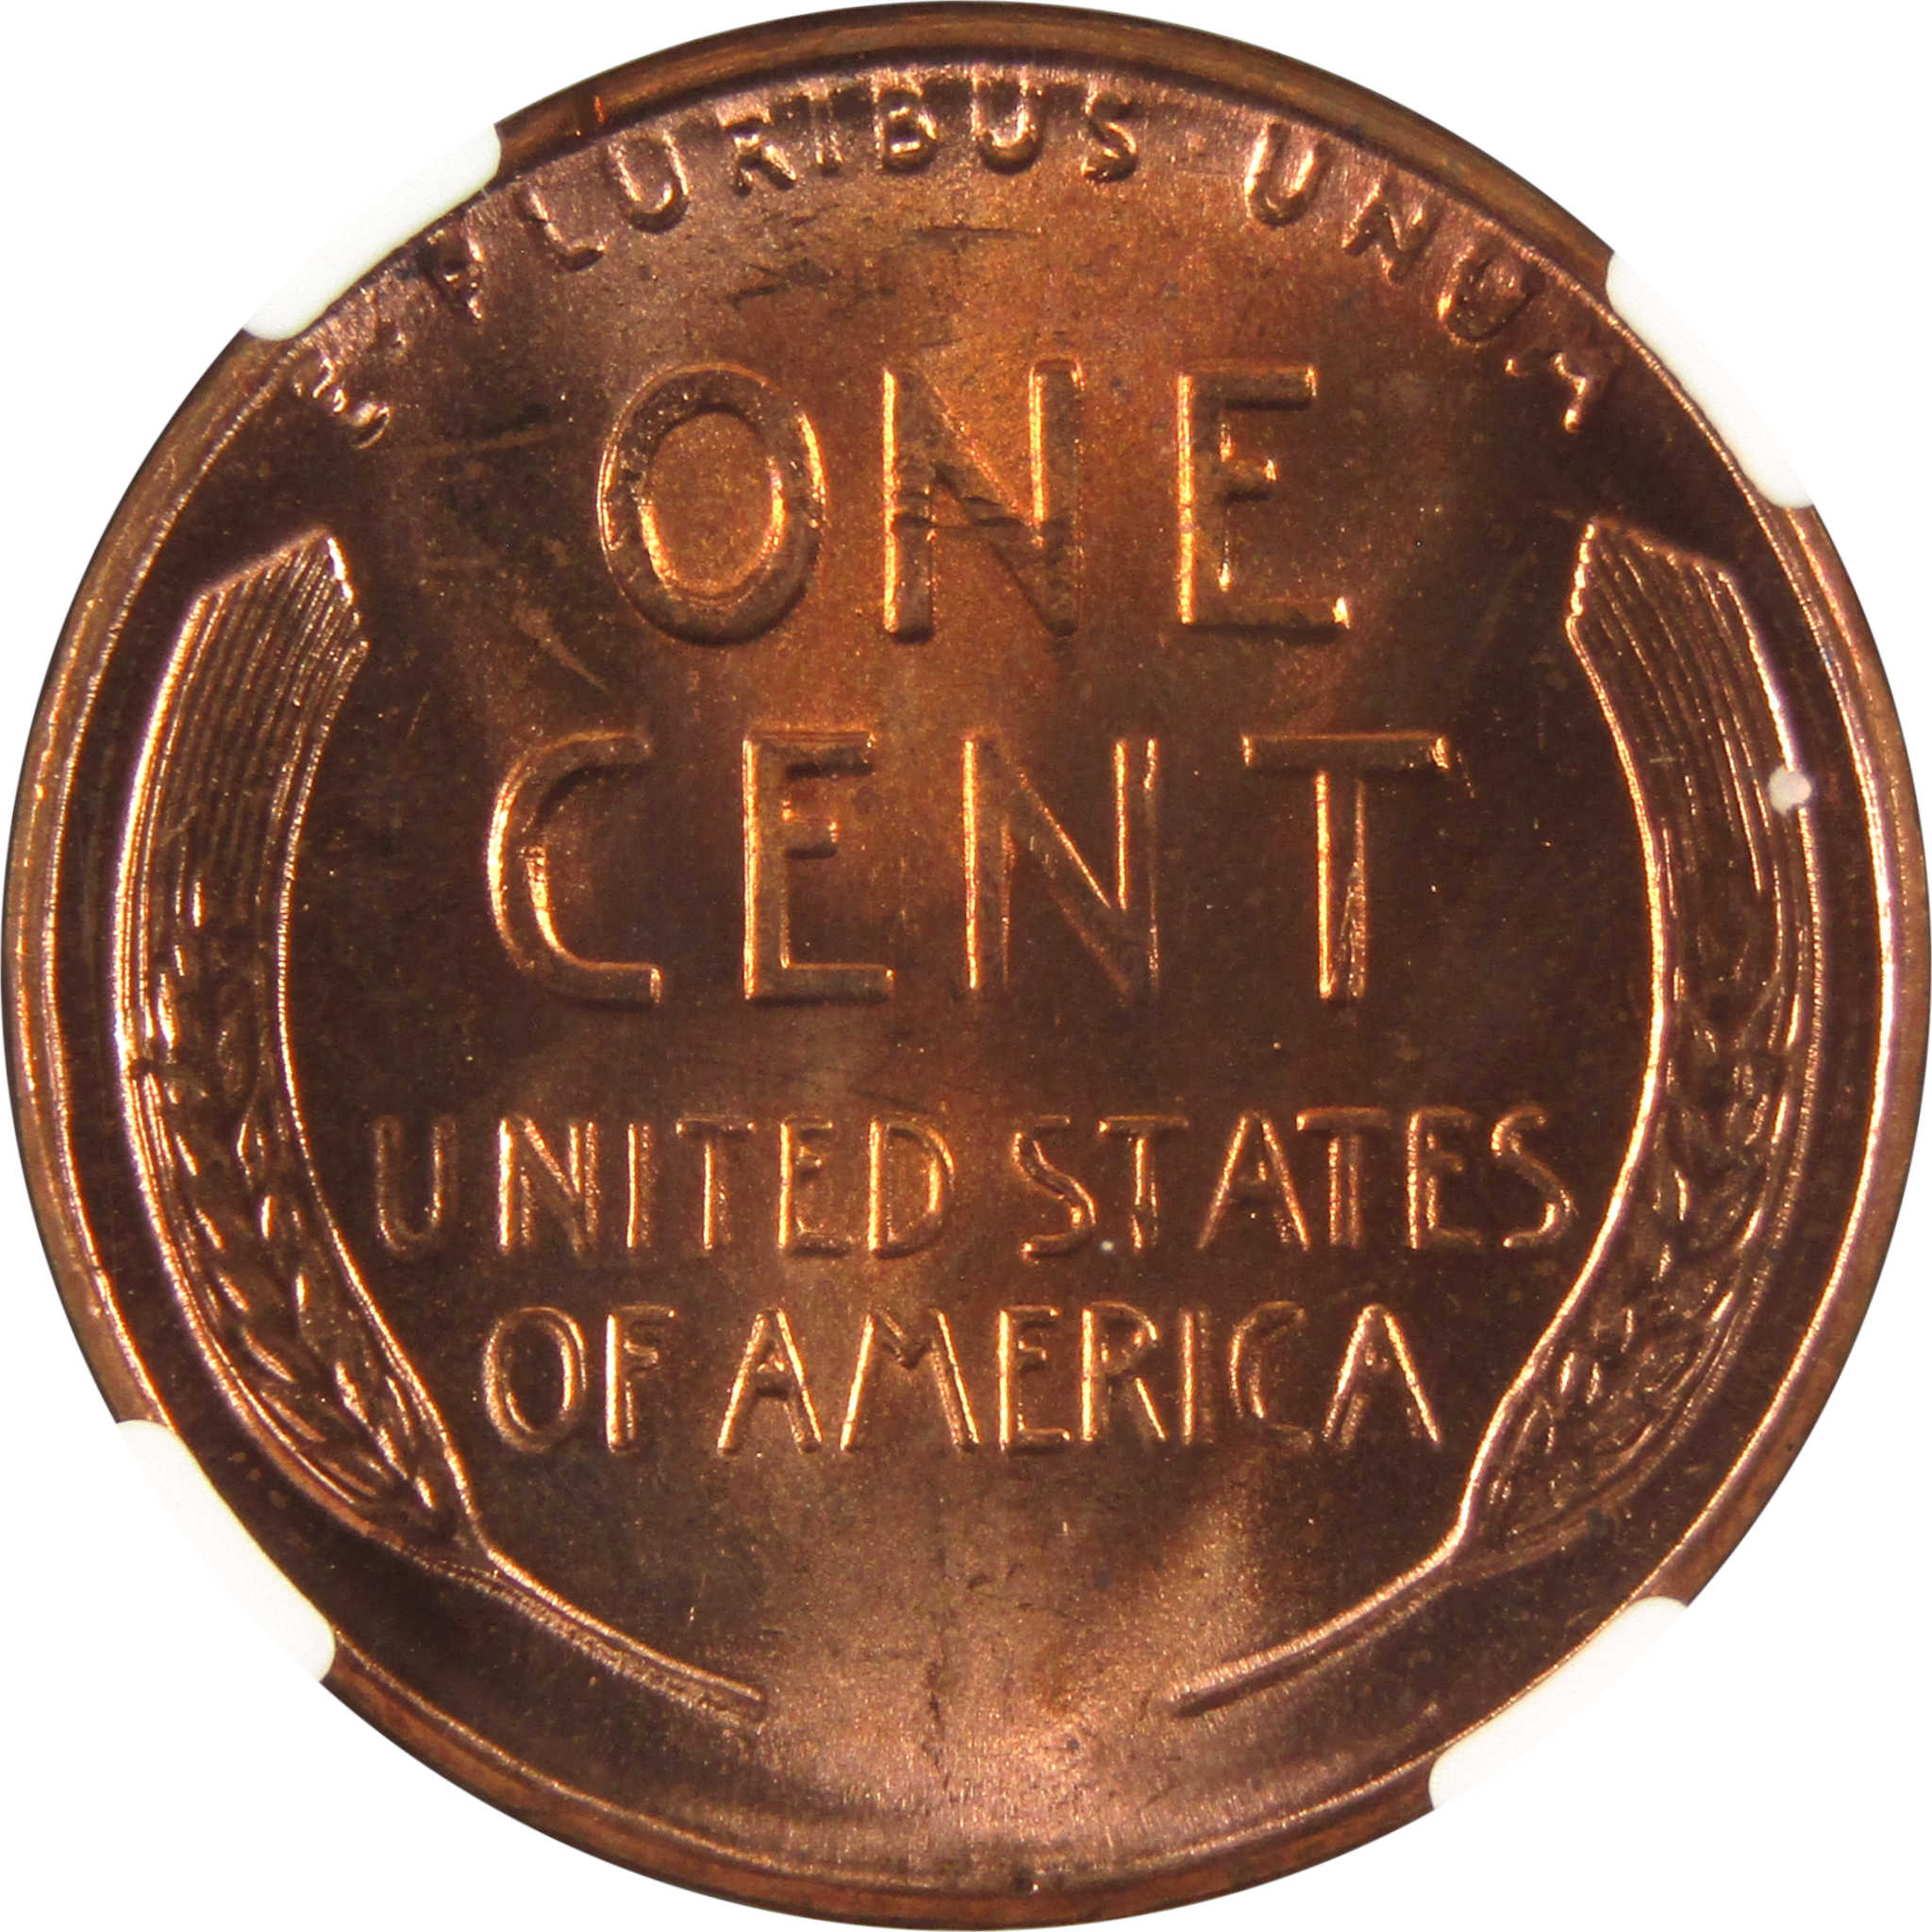 1958 Lincoln Wheat Cent MS 66 RD NGC Penny 1c Uncirculated SKU:I9683